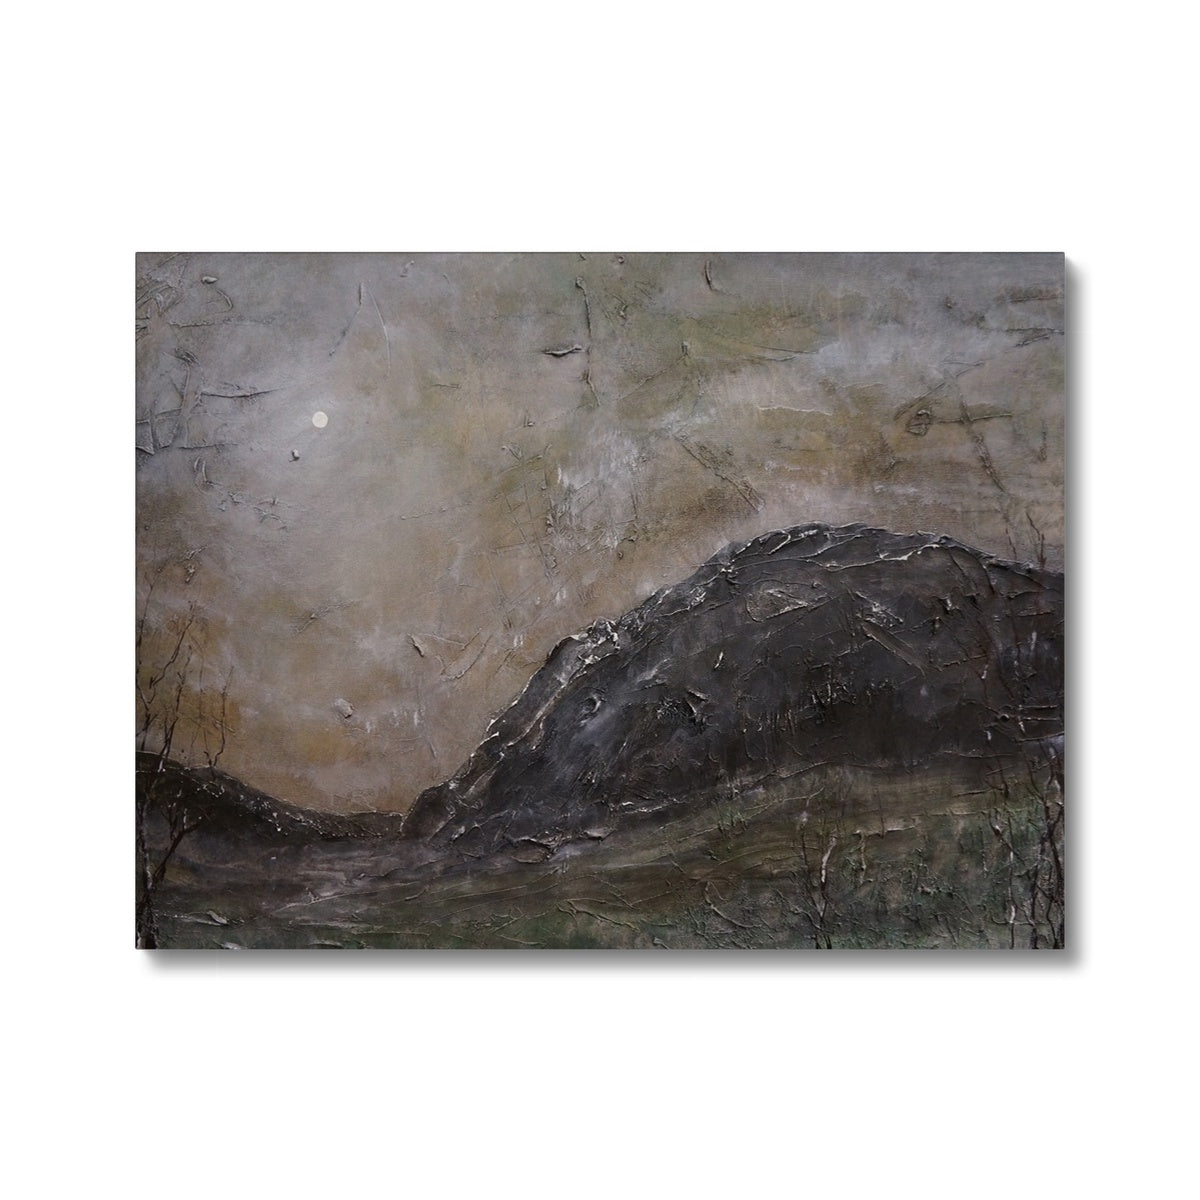 Glen Nevis Moonlight Painting | Canvas From Scotland-Contemporary Stretched Canvas Prints-Scottish Lochs & Mountains Art Gallery-24"x18"-Paintings, Prints, Homeware, Art Gifts From Scotland By Scottish Artist Kevin Hunter